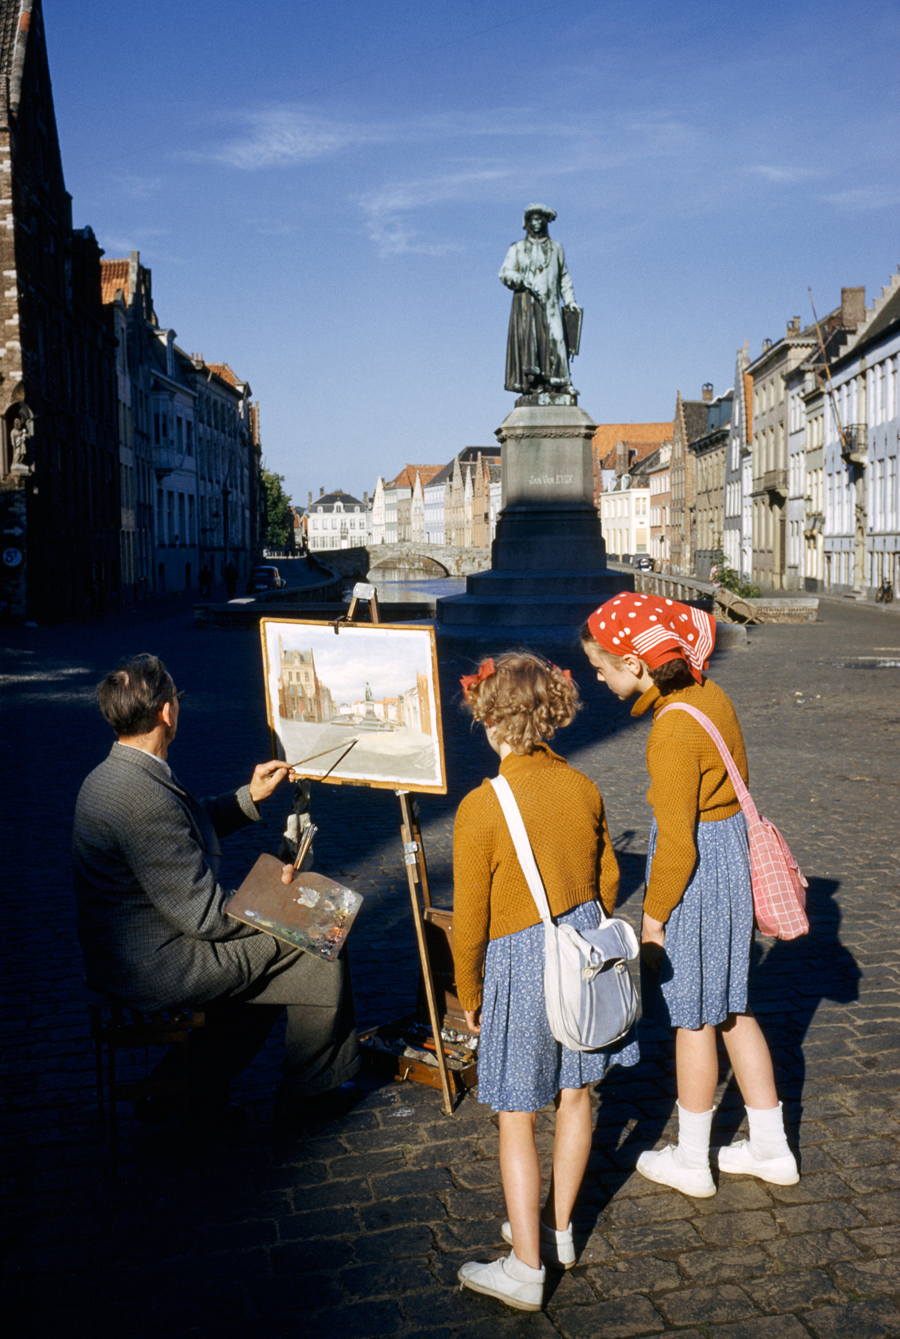 Girls watch artist painting picture of statue of Flemish artist in Bruges, Belgium, May 1955.